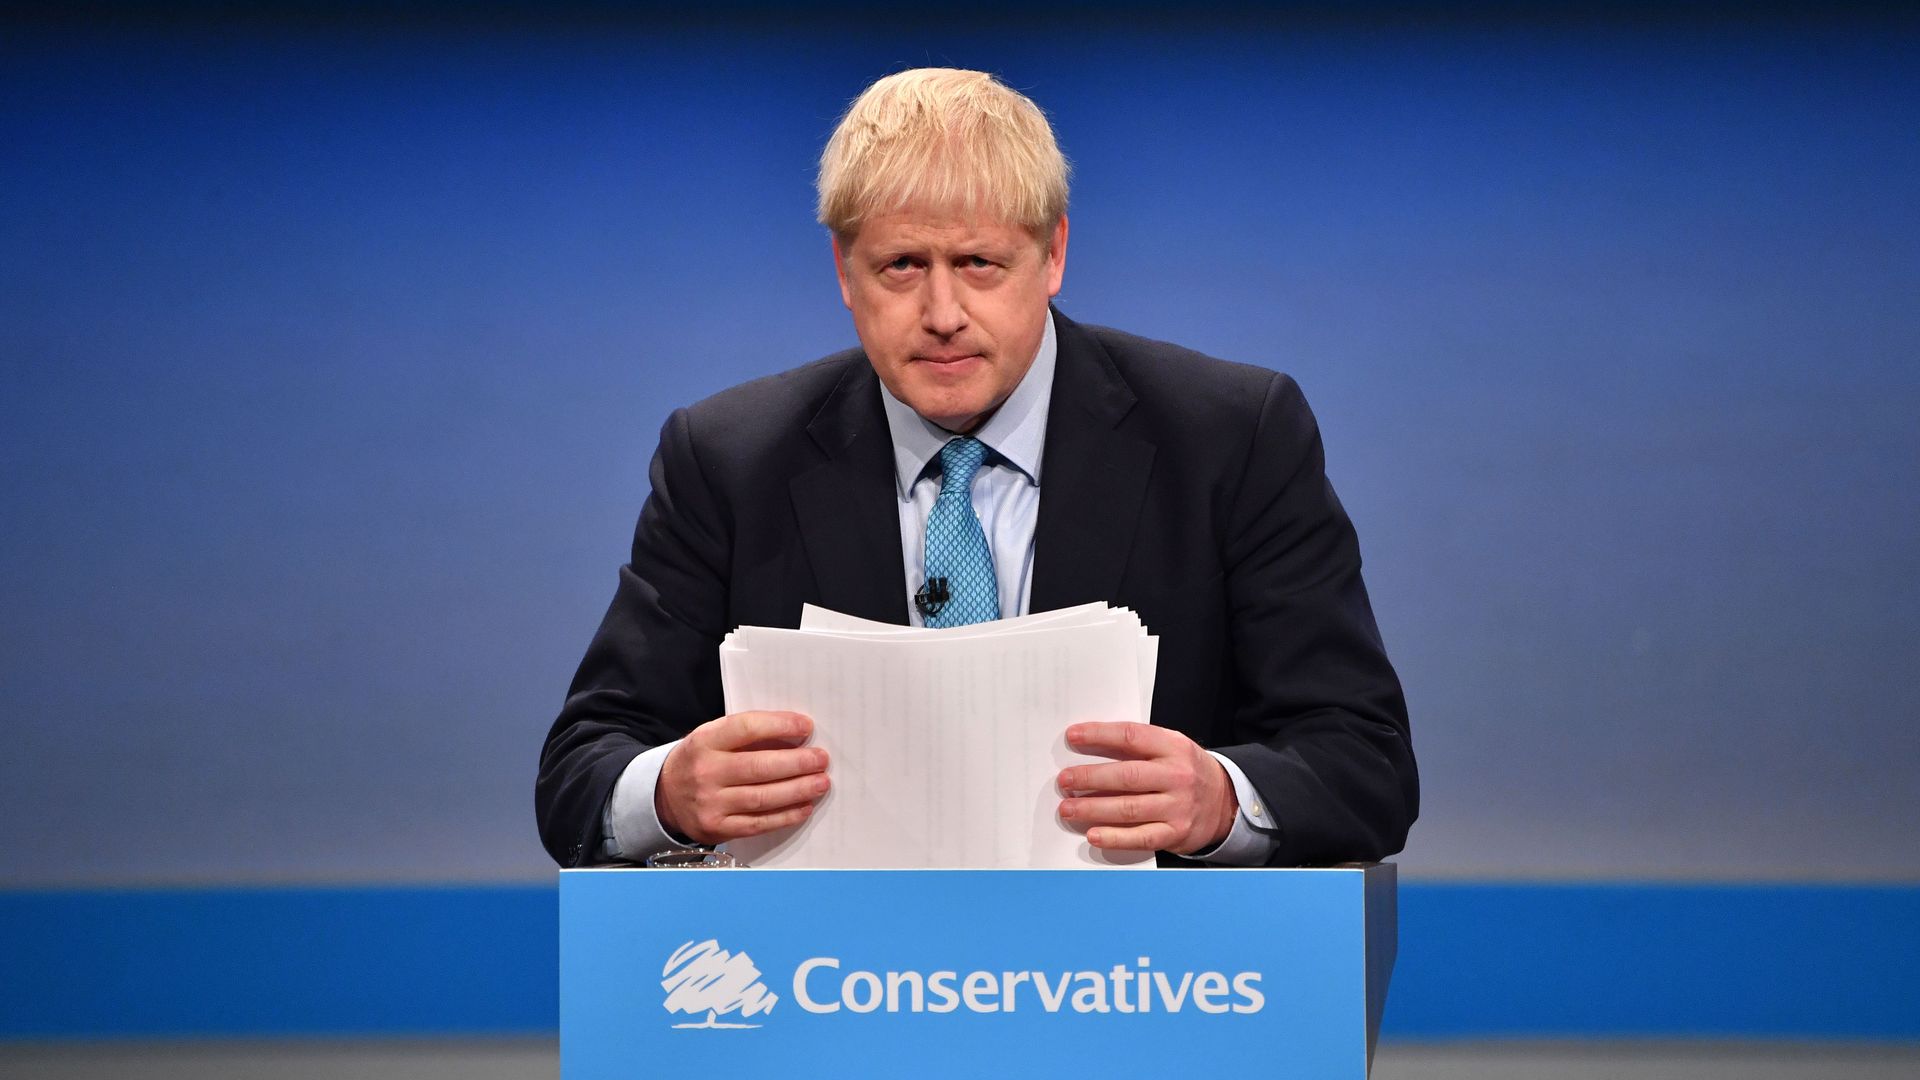 Britain's Prime Minister Boris Johnson shuffles his papers as he delivers his keynote speech